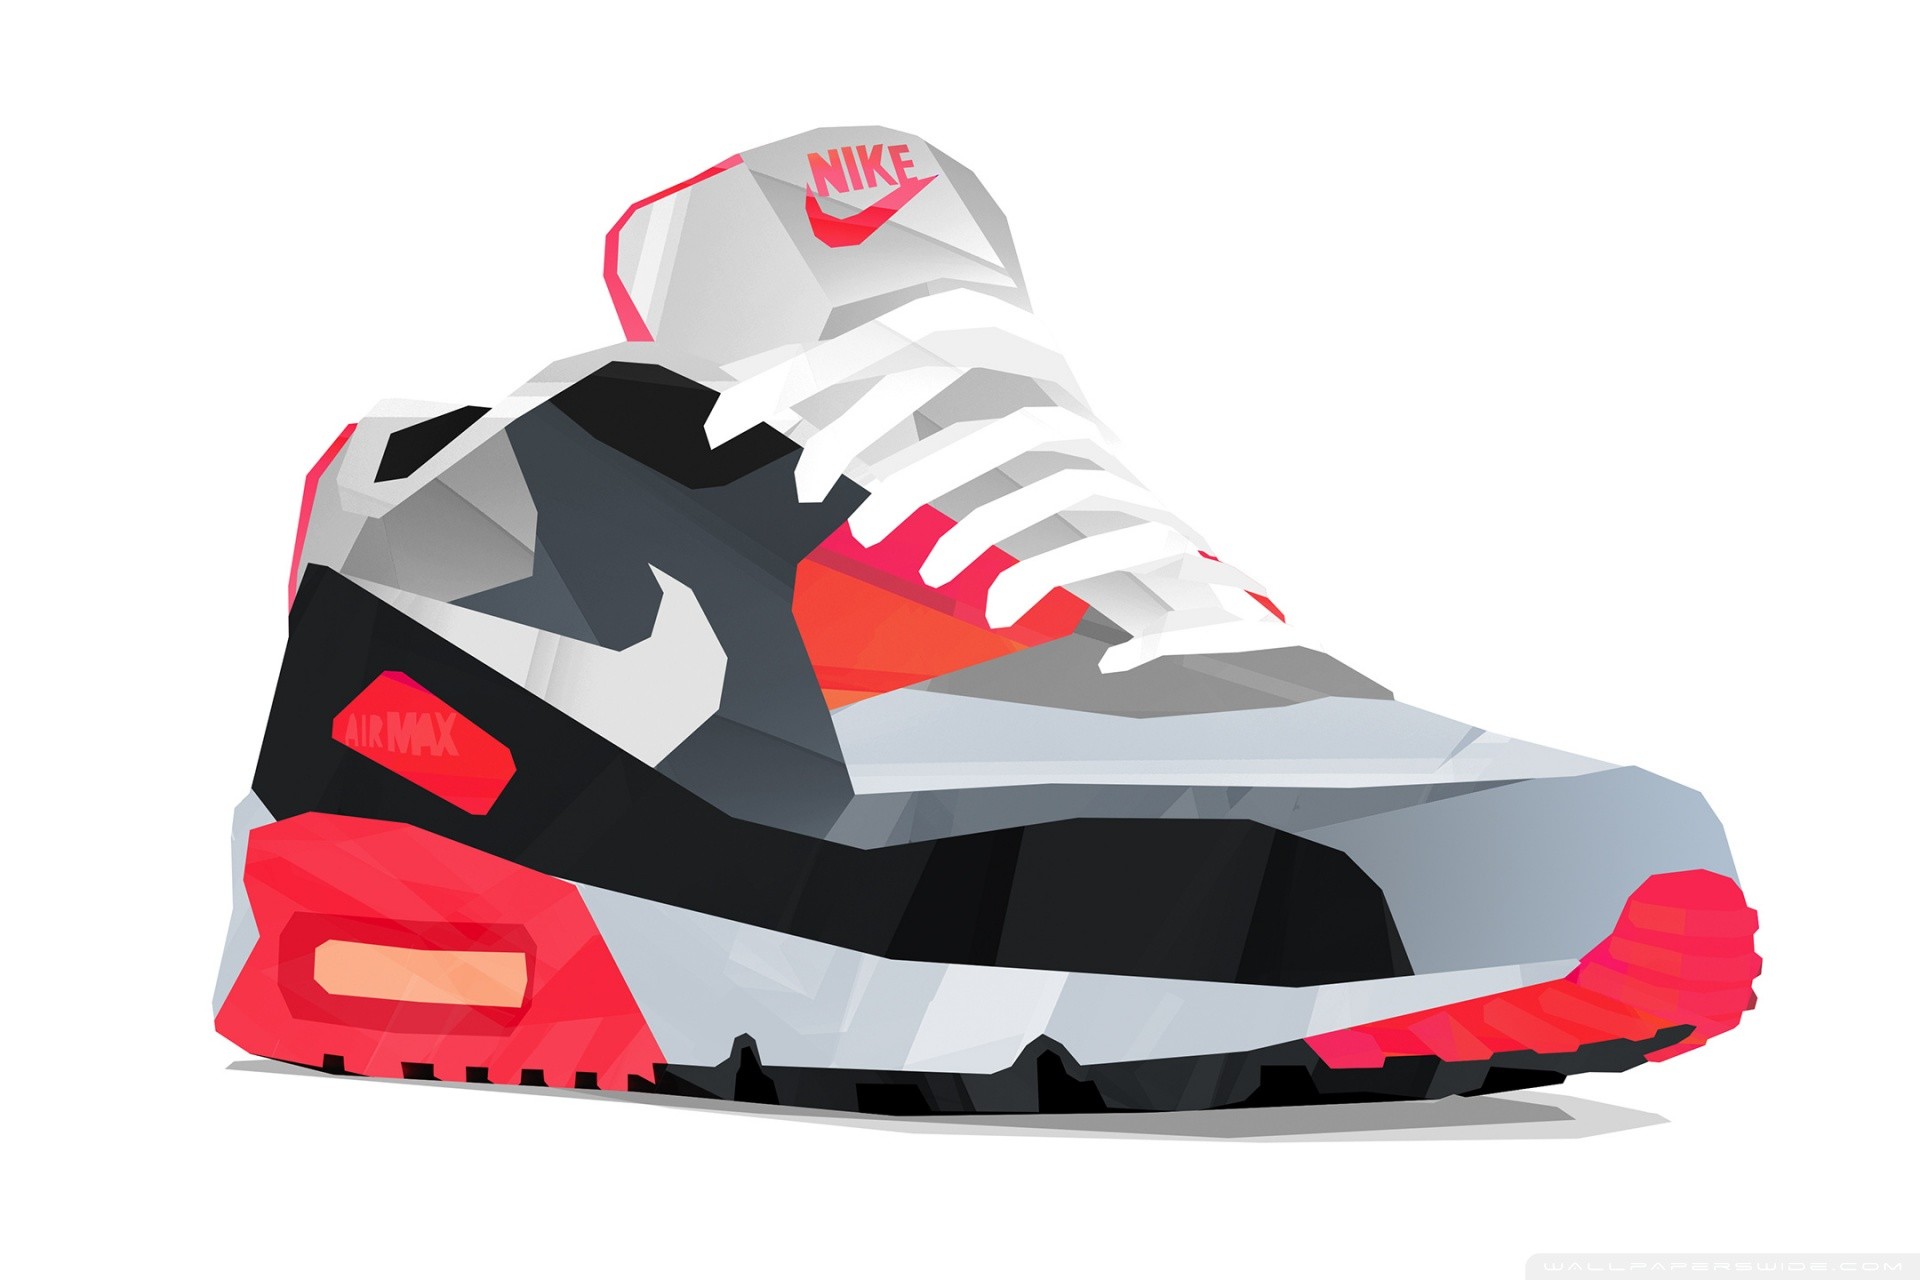 Nike Air Max Wallpaper (57+ pictures)